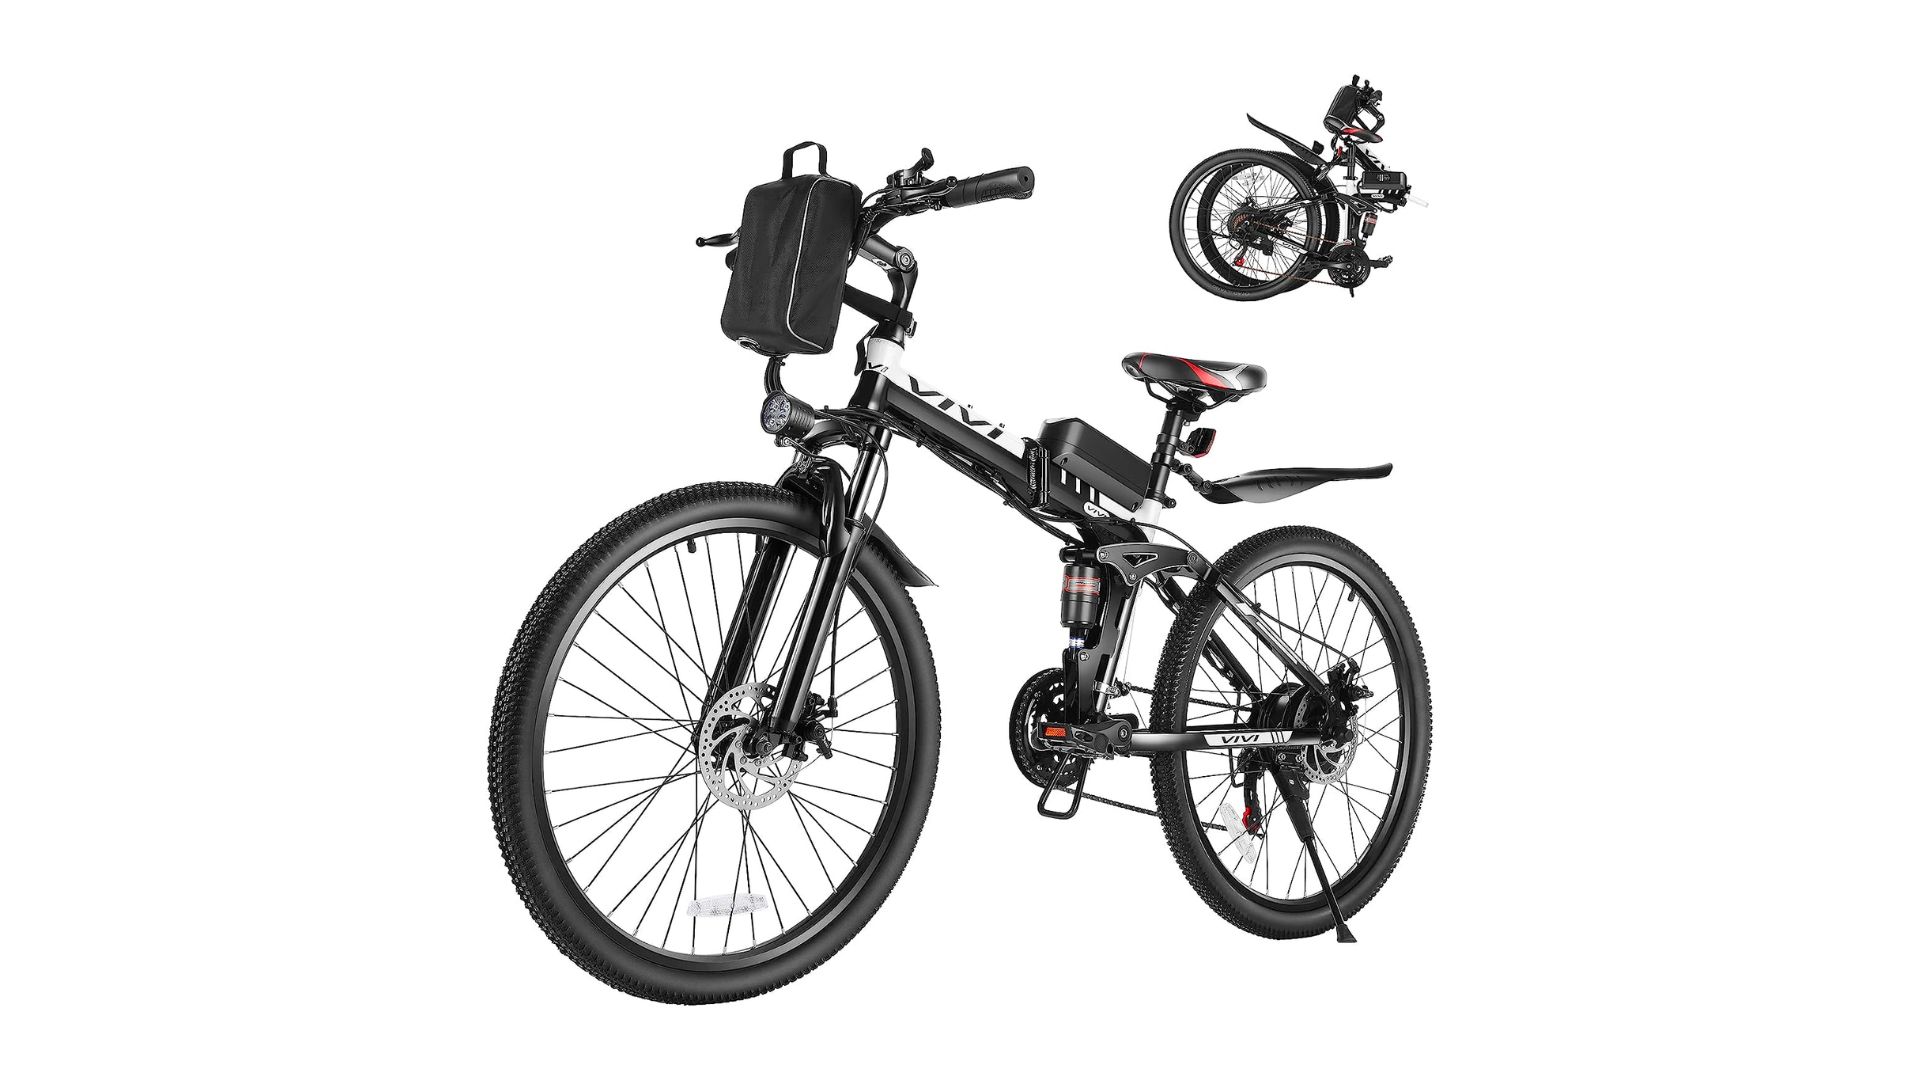 Best Electric Bikes for Women